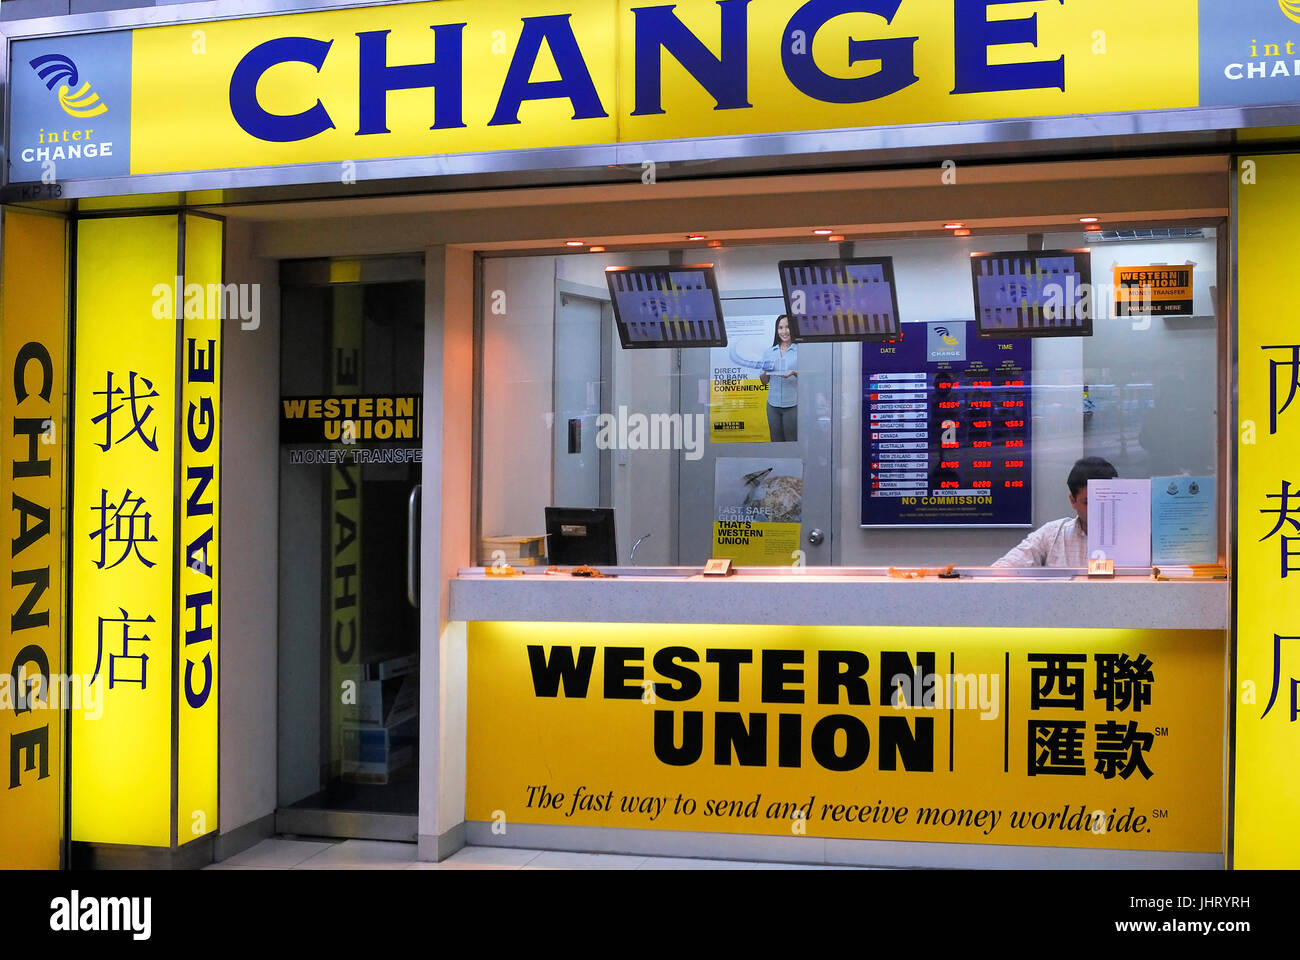 "Change - exchange office the western union bank, Kowloon, Hong Kong Stock Photo, Royalty Free ...